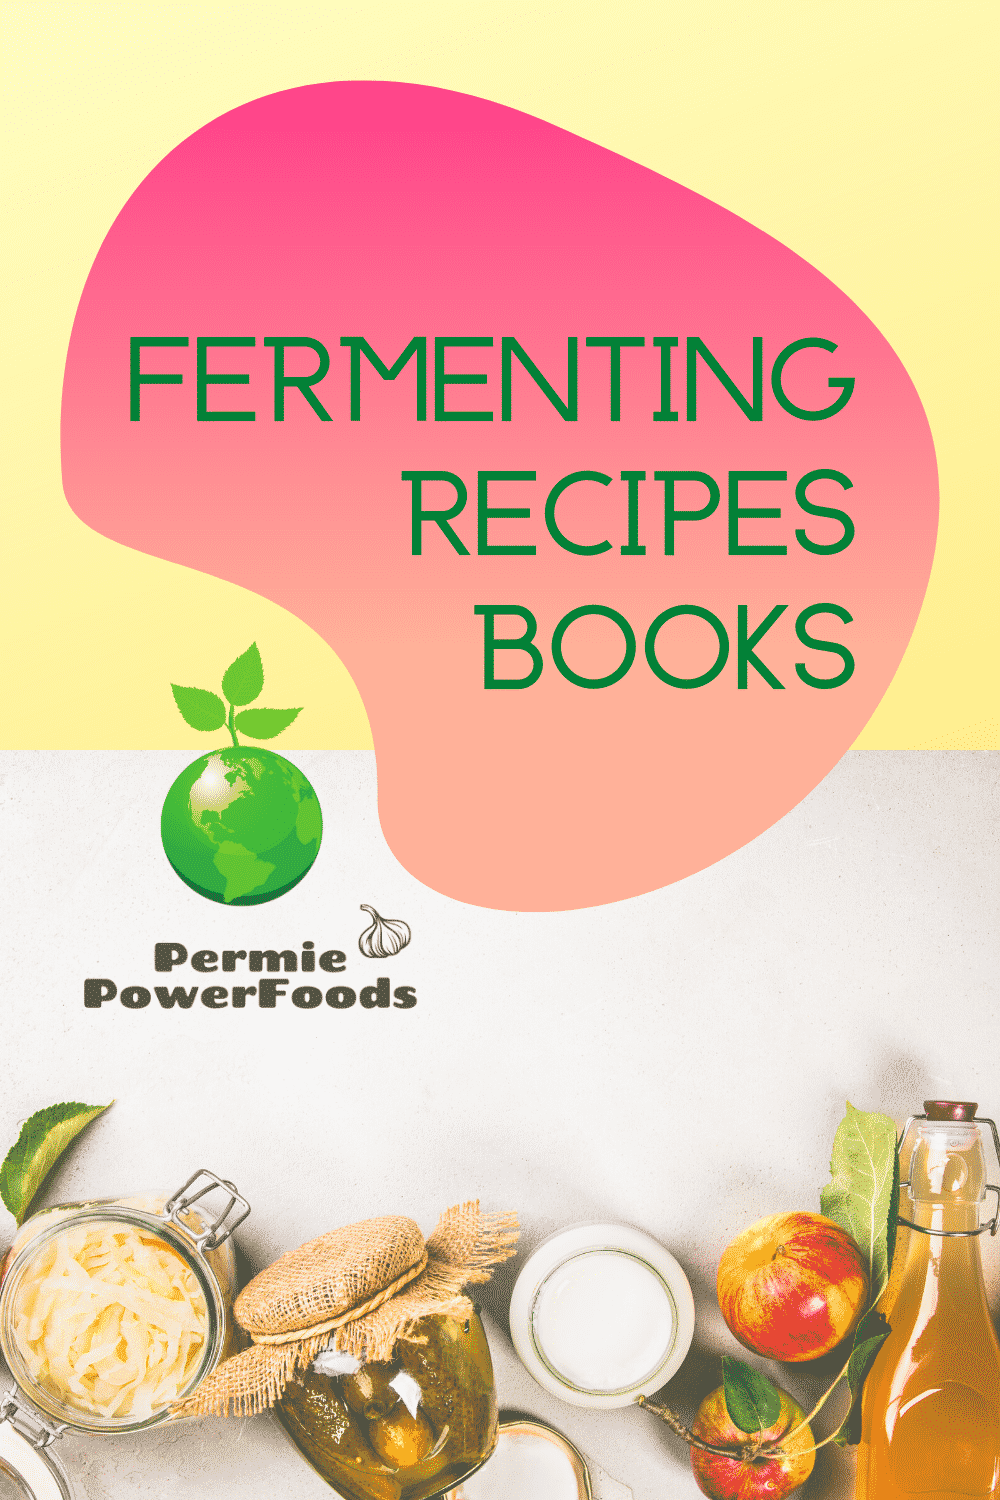 top fermenting books a collection of recipes on fermenting and sprouting foods by permie power foods